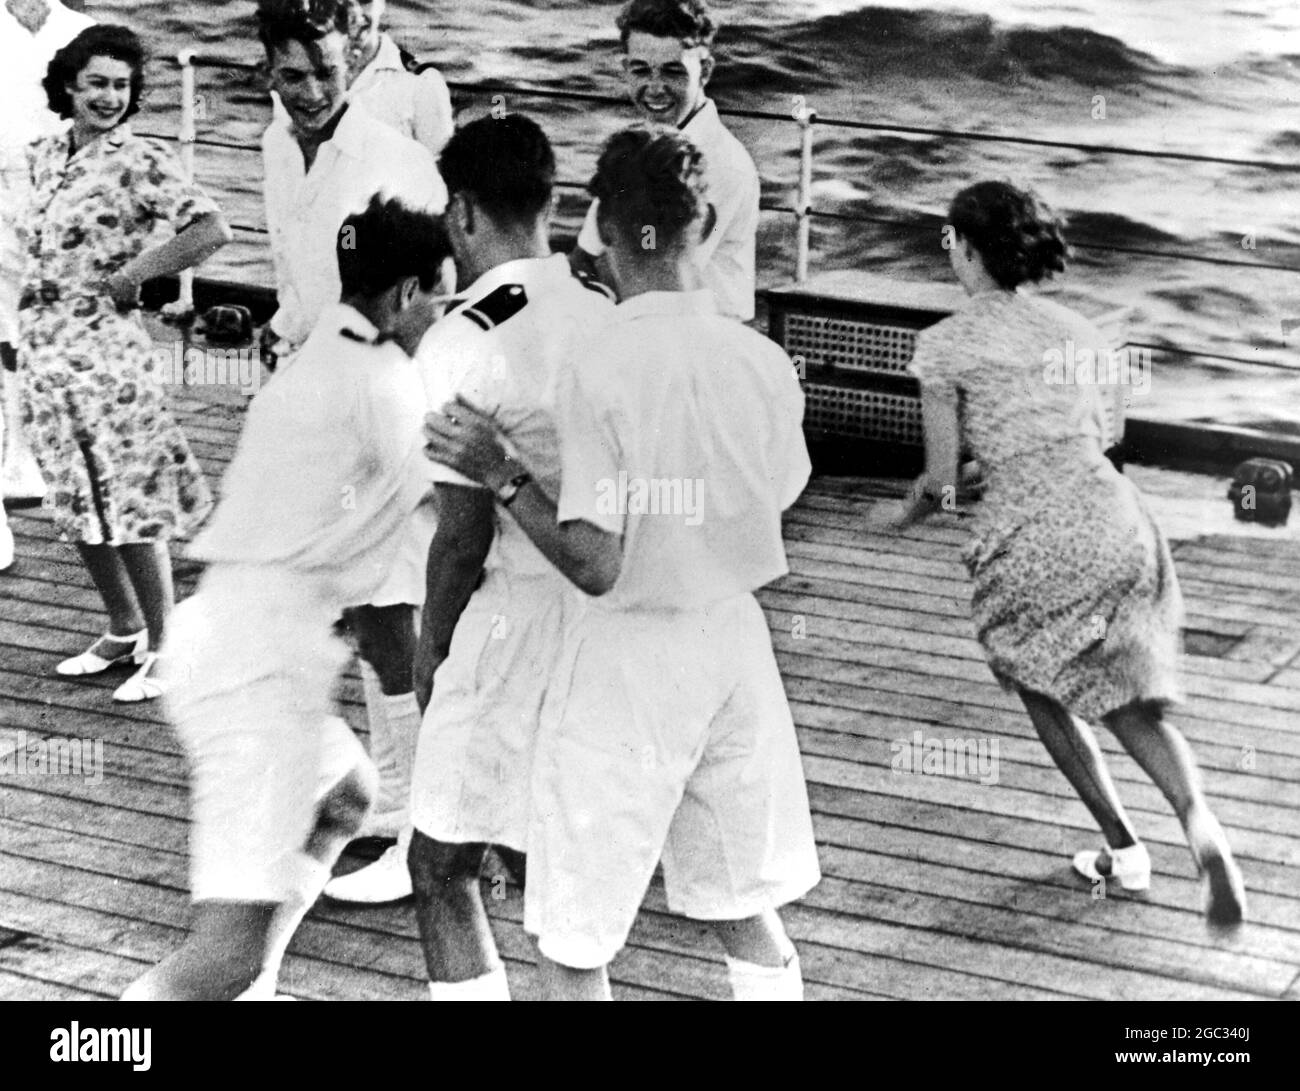 Princess Elizabeth celebrates her 21st birthday with a deck game with Princess Margaret and crew of the HMS Vanguard during a voyage to South Africa. She is pictured laughing at he sister who is being chased by an officer.. 21st April 1947 Stock Photo